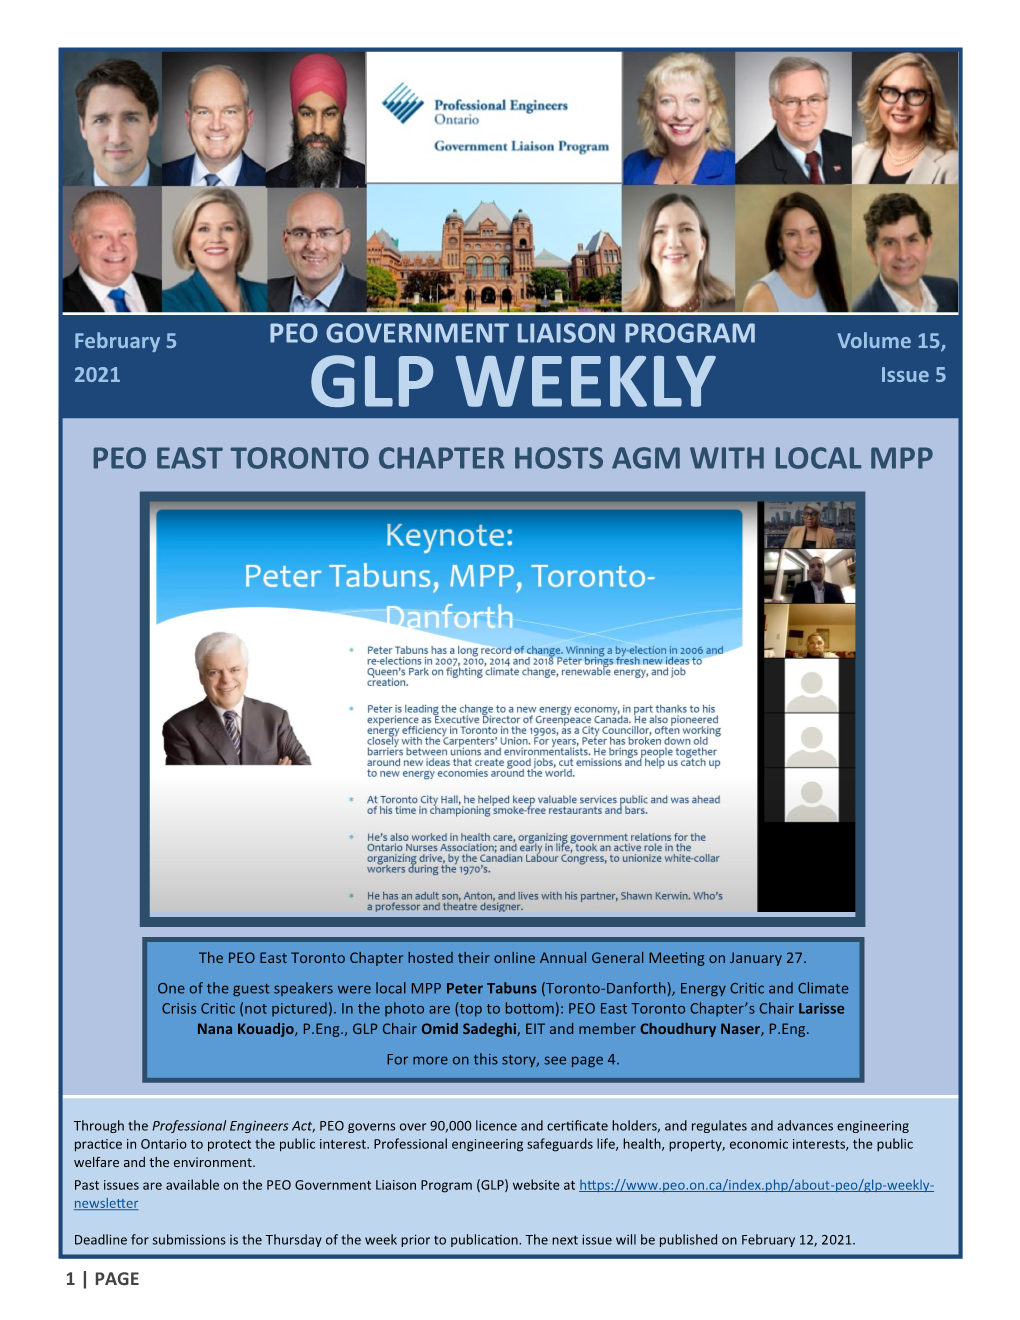 GLP WEEKLY Issue 5 PEO EAST TORONTO CHAPTER HOSTS AGM with LOCAL MPP